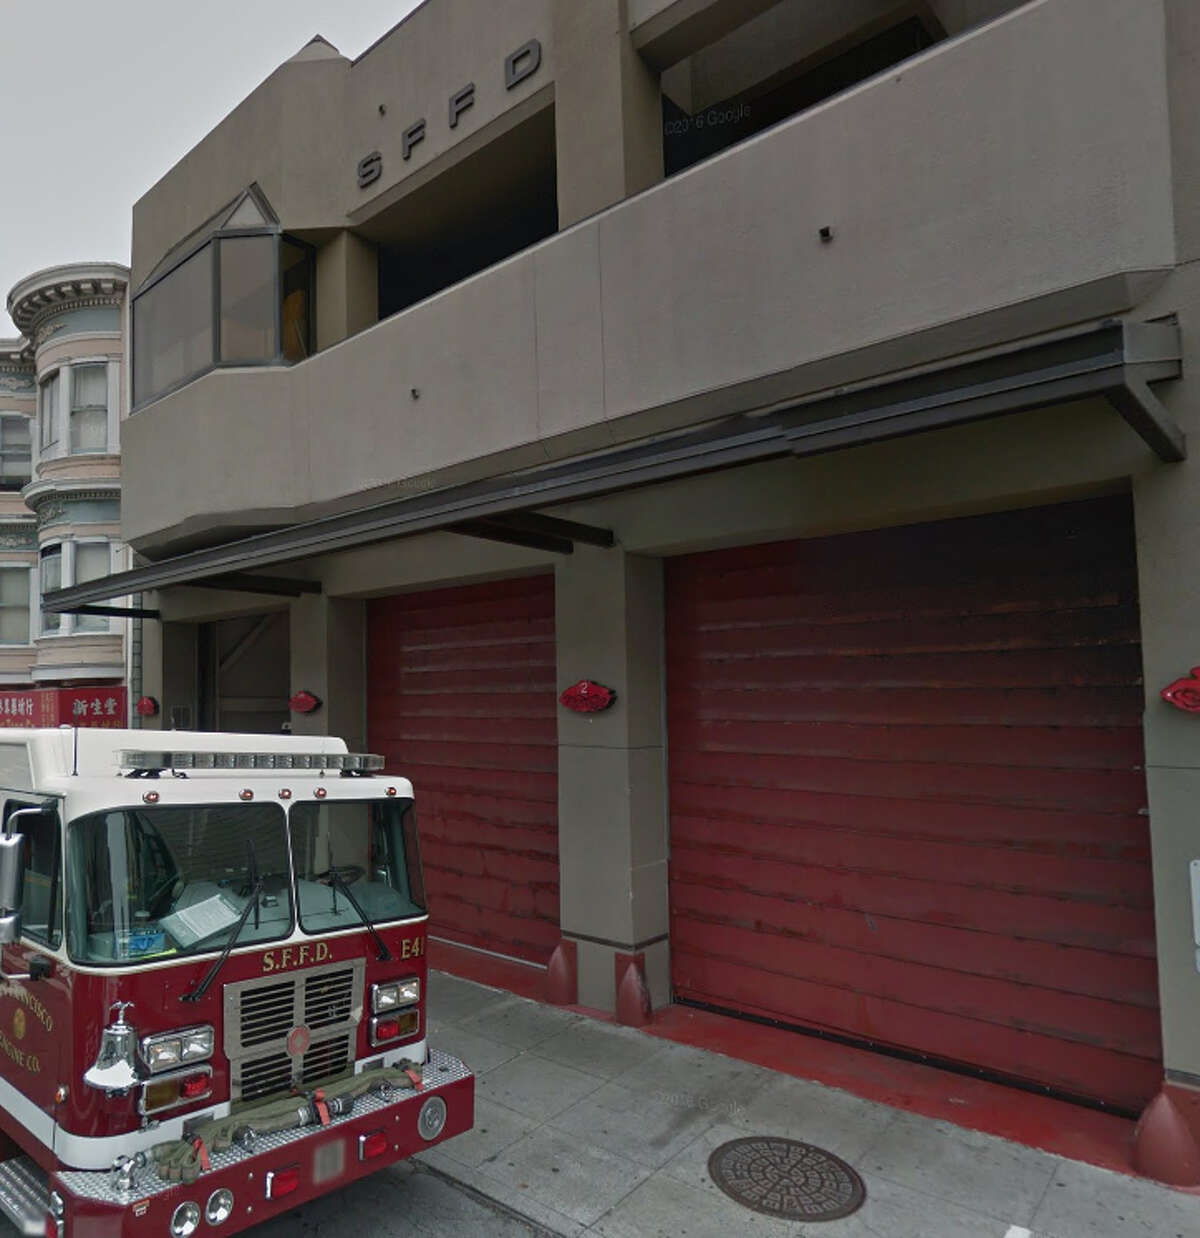 Outside Station 2 in Chinatown, where male firefighters allegedly harassed a female co-worker.